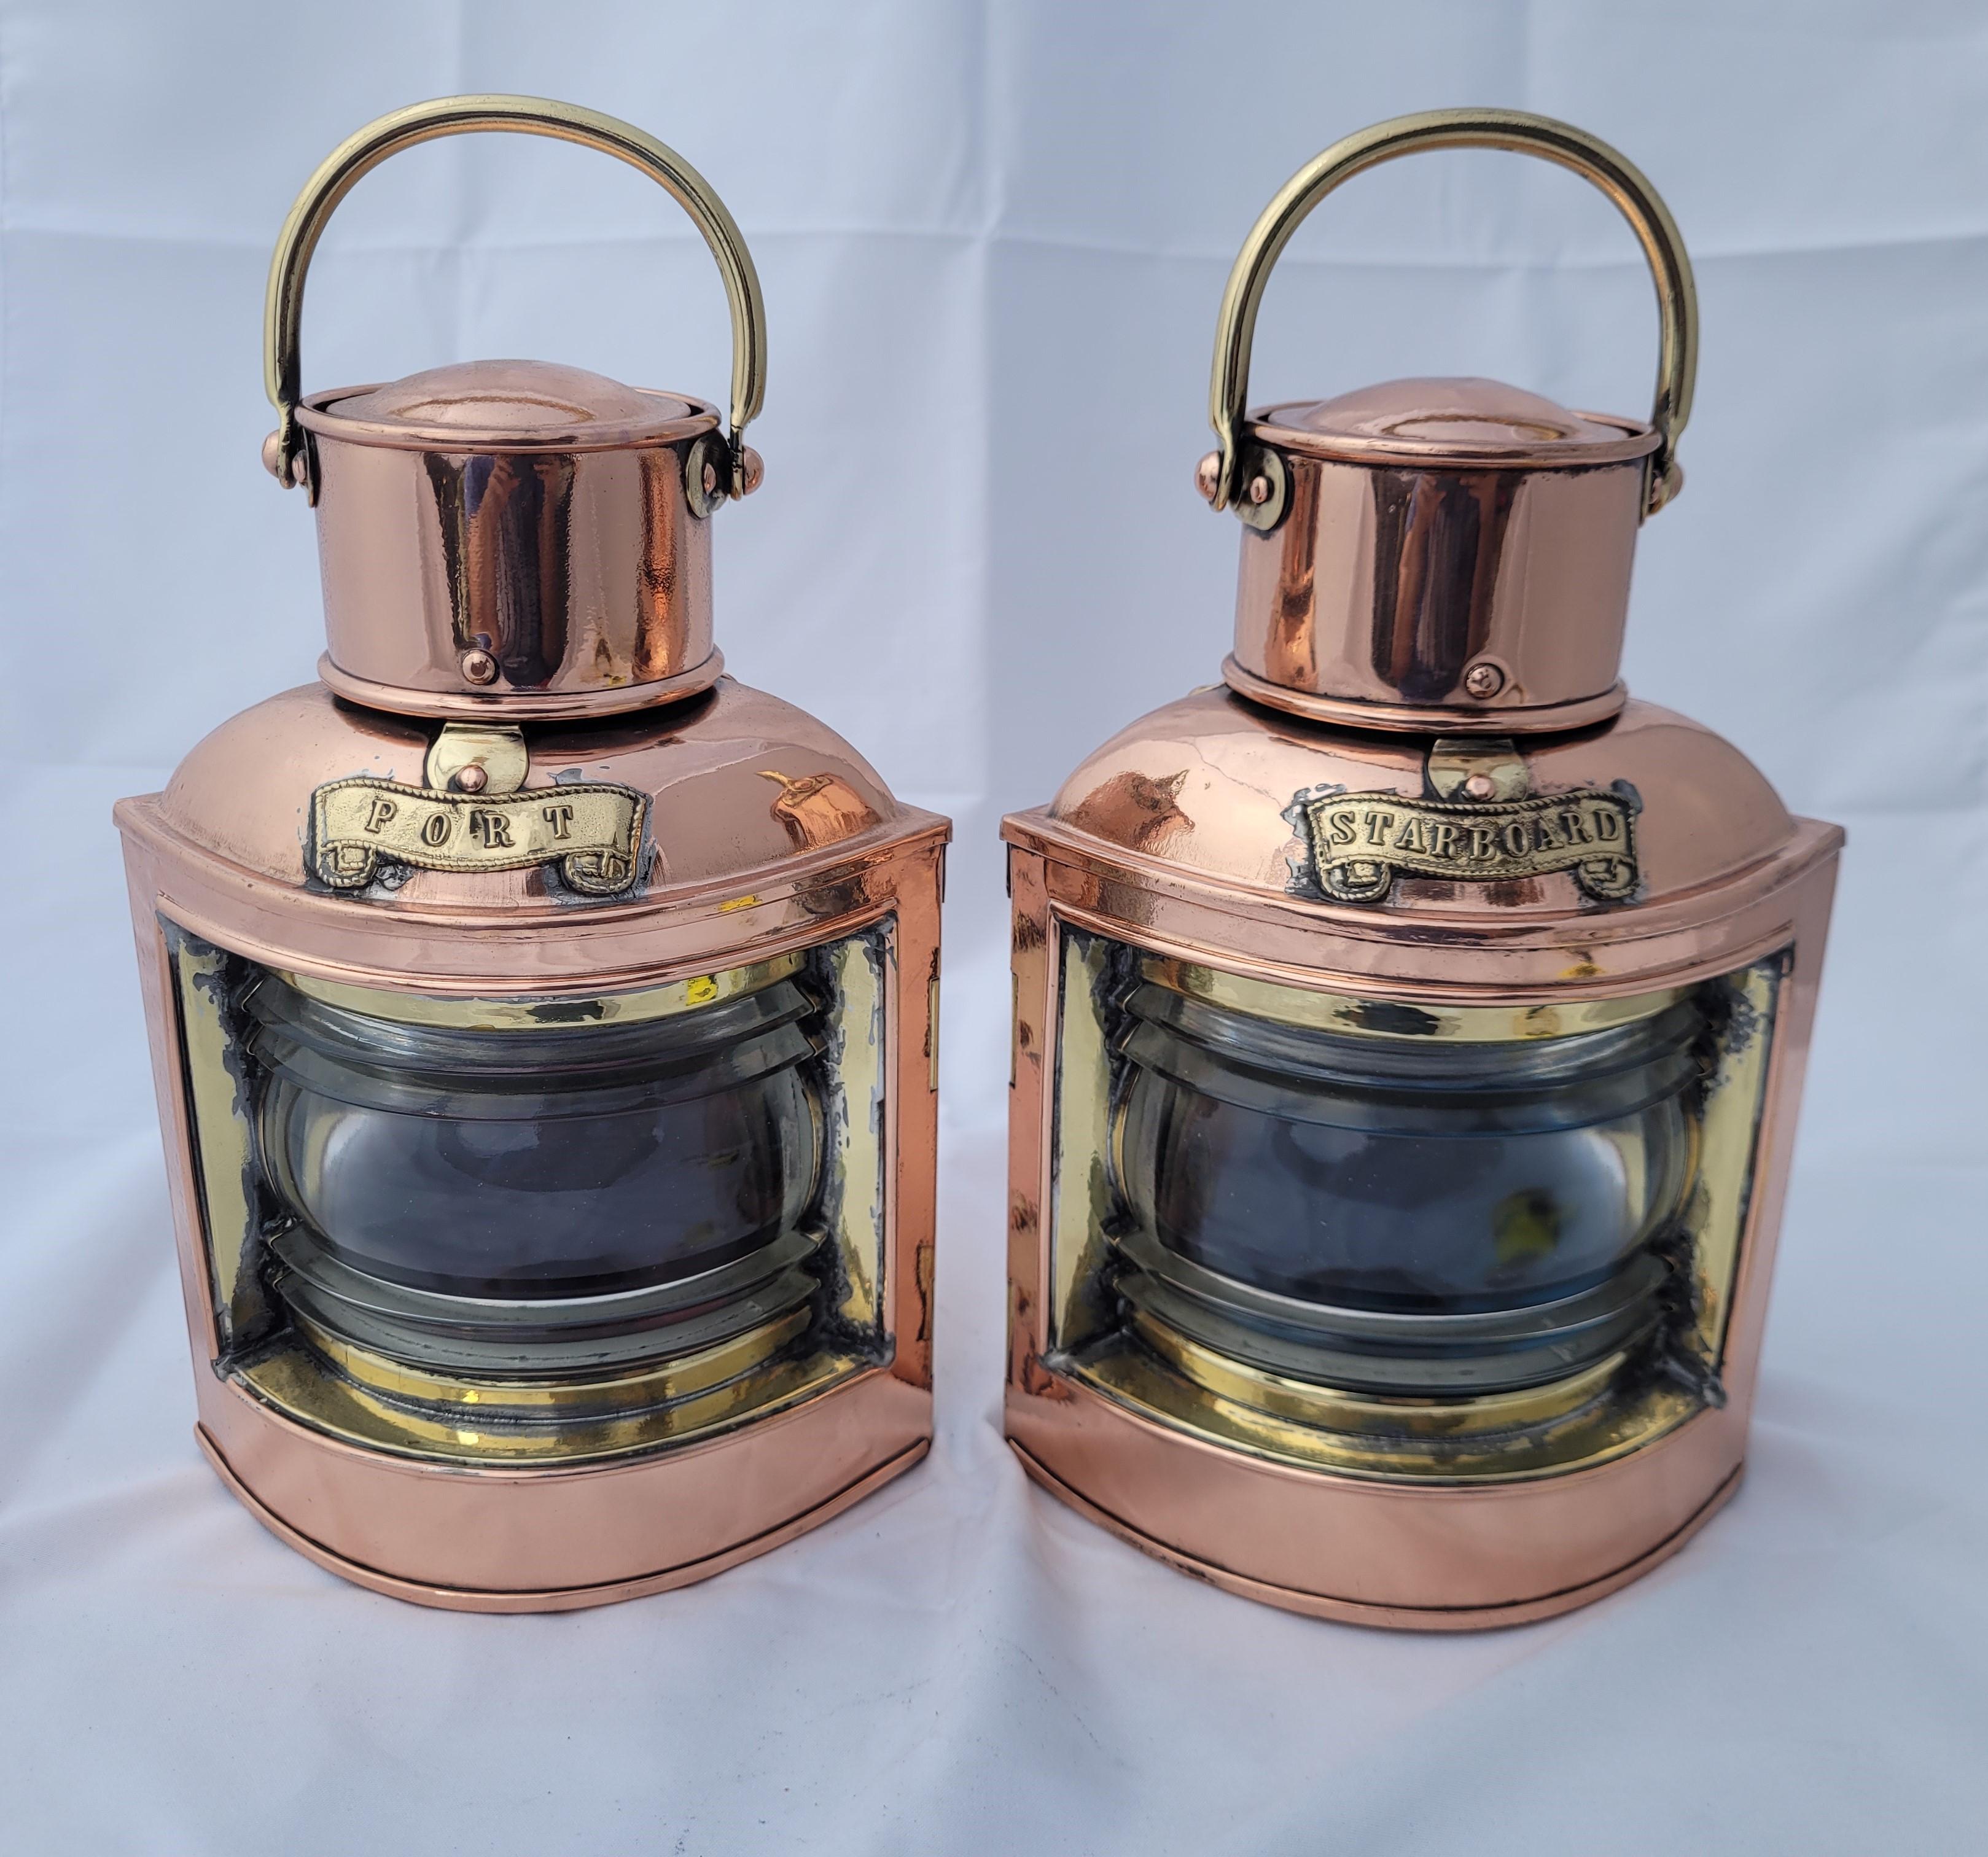 Pair of polished and lacquered port and starboard boat lanterns by Den Hann of Rotterdam Holland. Nice sturdy pair with clear Fresnel lenses in red and blue filters. With hinged rear doors, brass carry handles and mounting brackets. Den Hann was